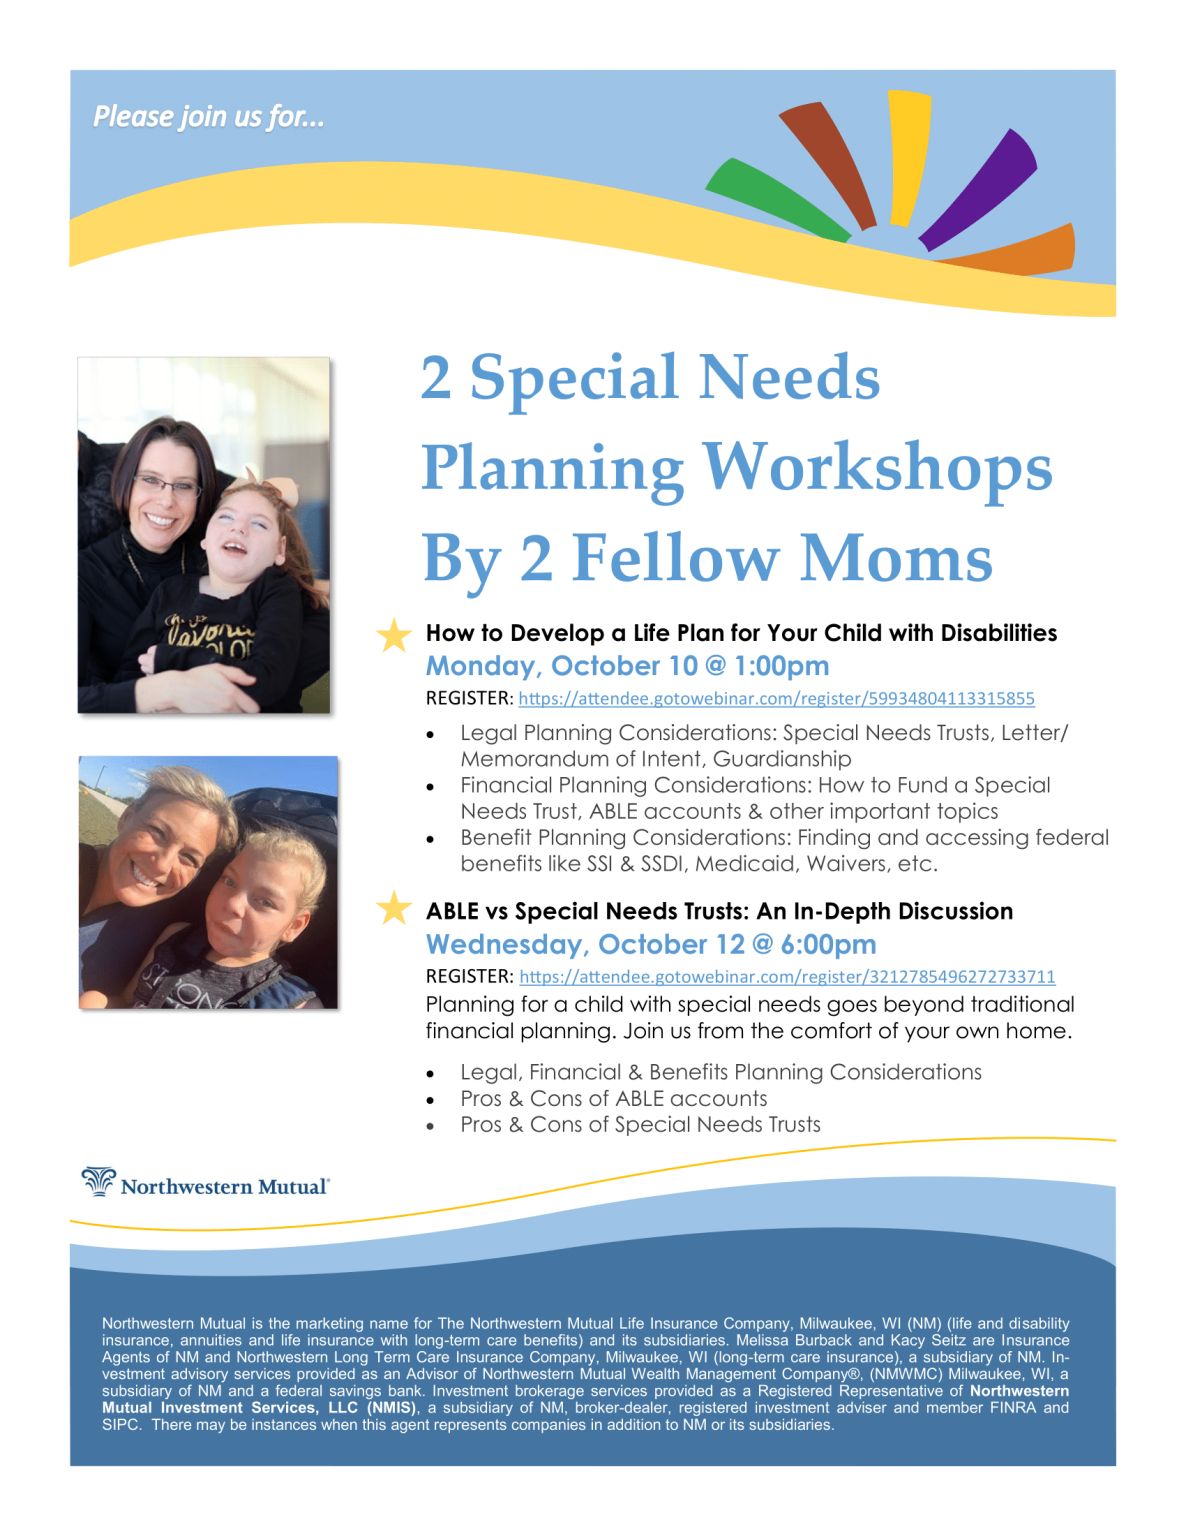 wauwatosa-school-district-on-linkedin-two-fellow-moms-will-be-hosting